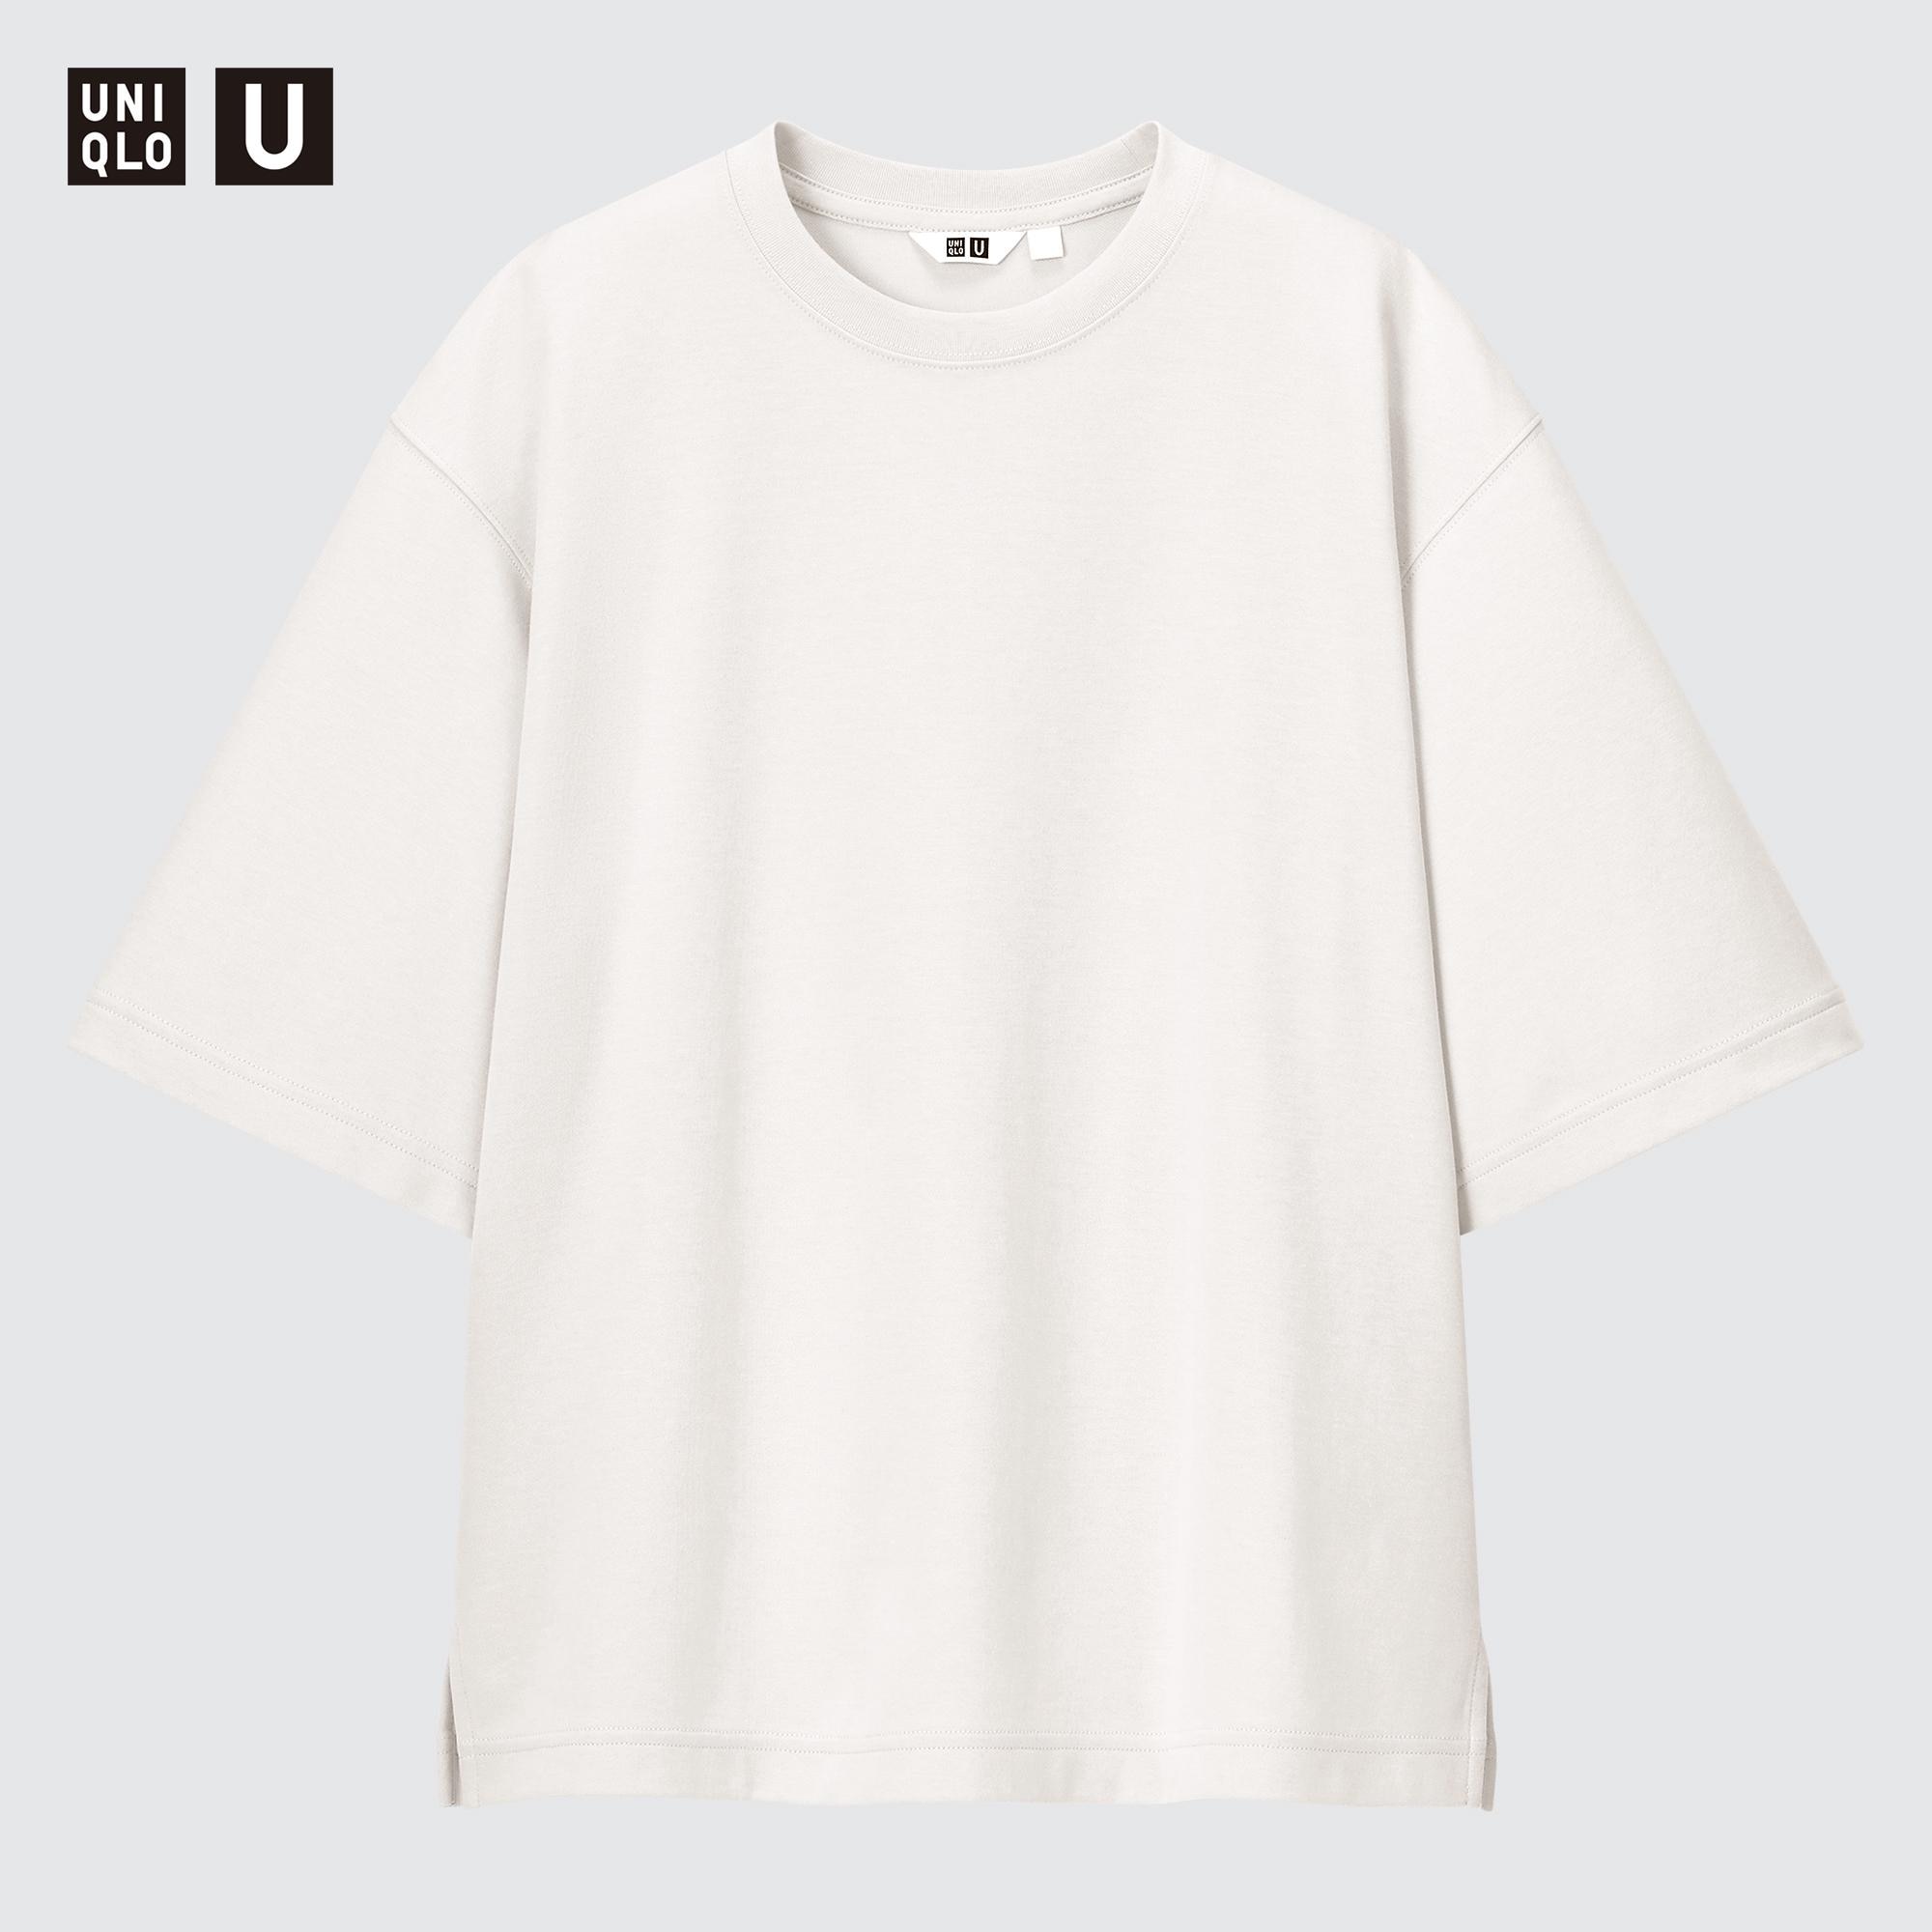 AIRism Crew Neck T-shirts & Dry Stretch Easy shorts make the perfect comfy  companion for your year-end staycation. #Uniqlo #UniqloSG #li